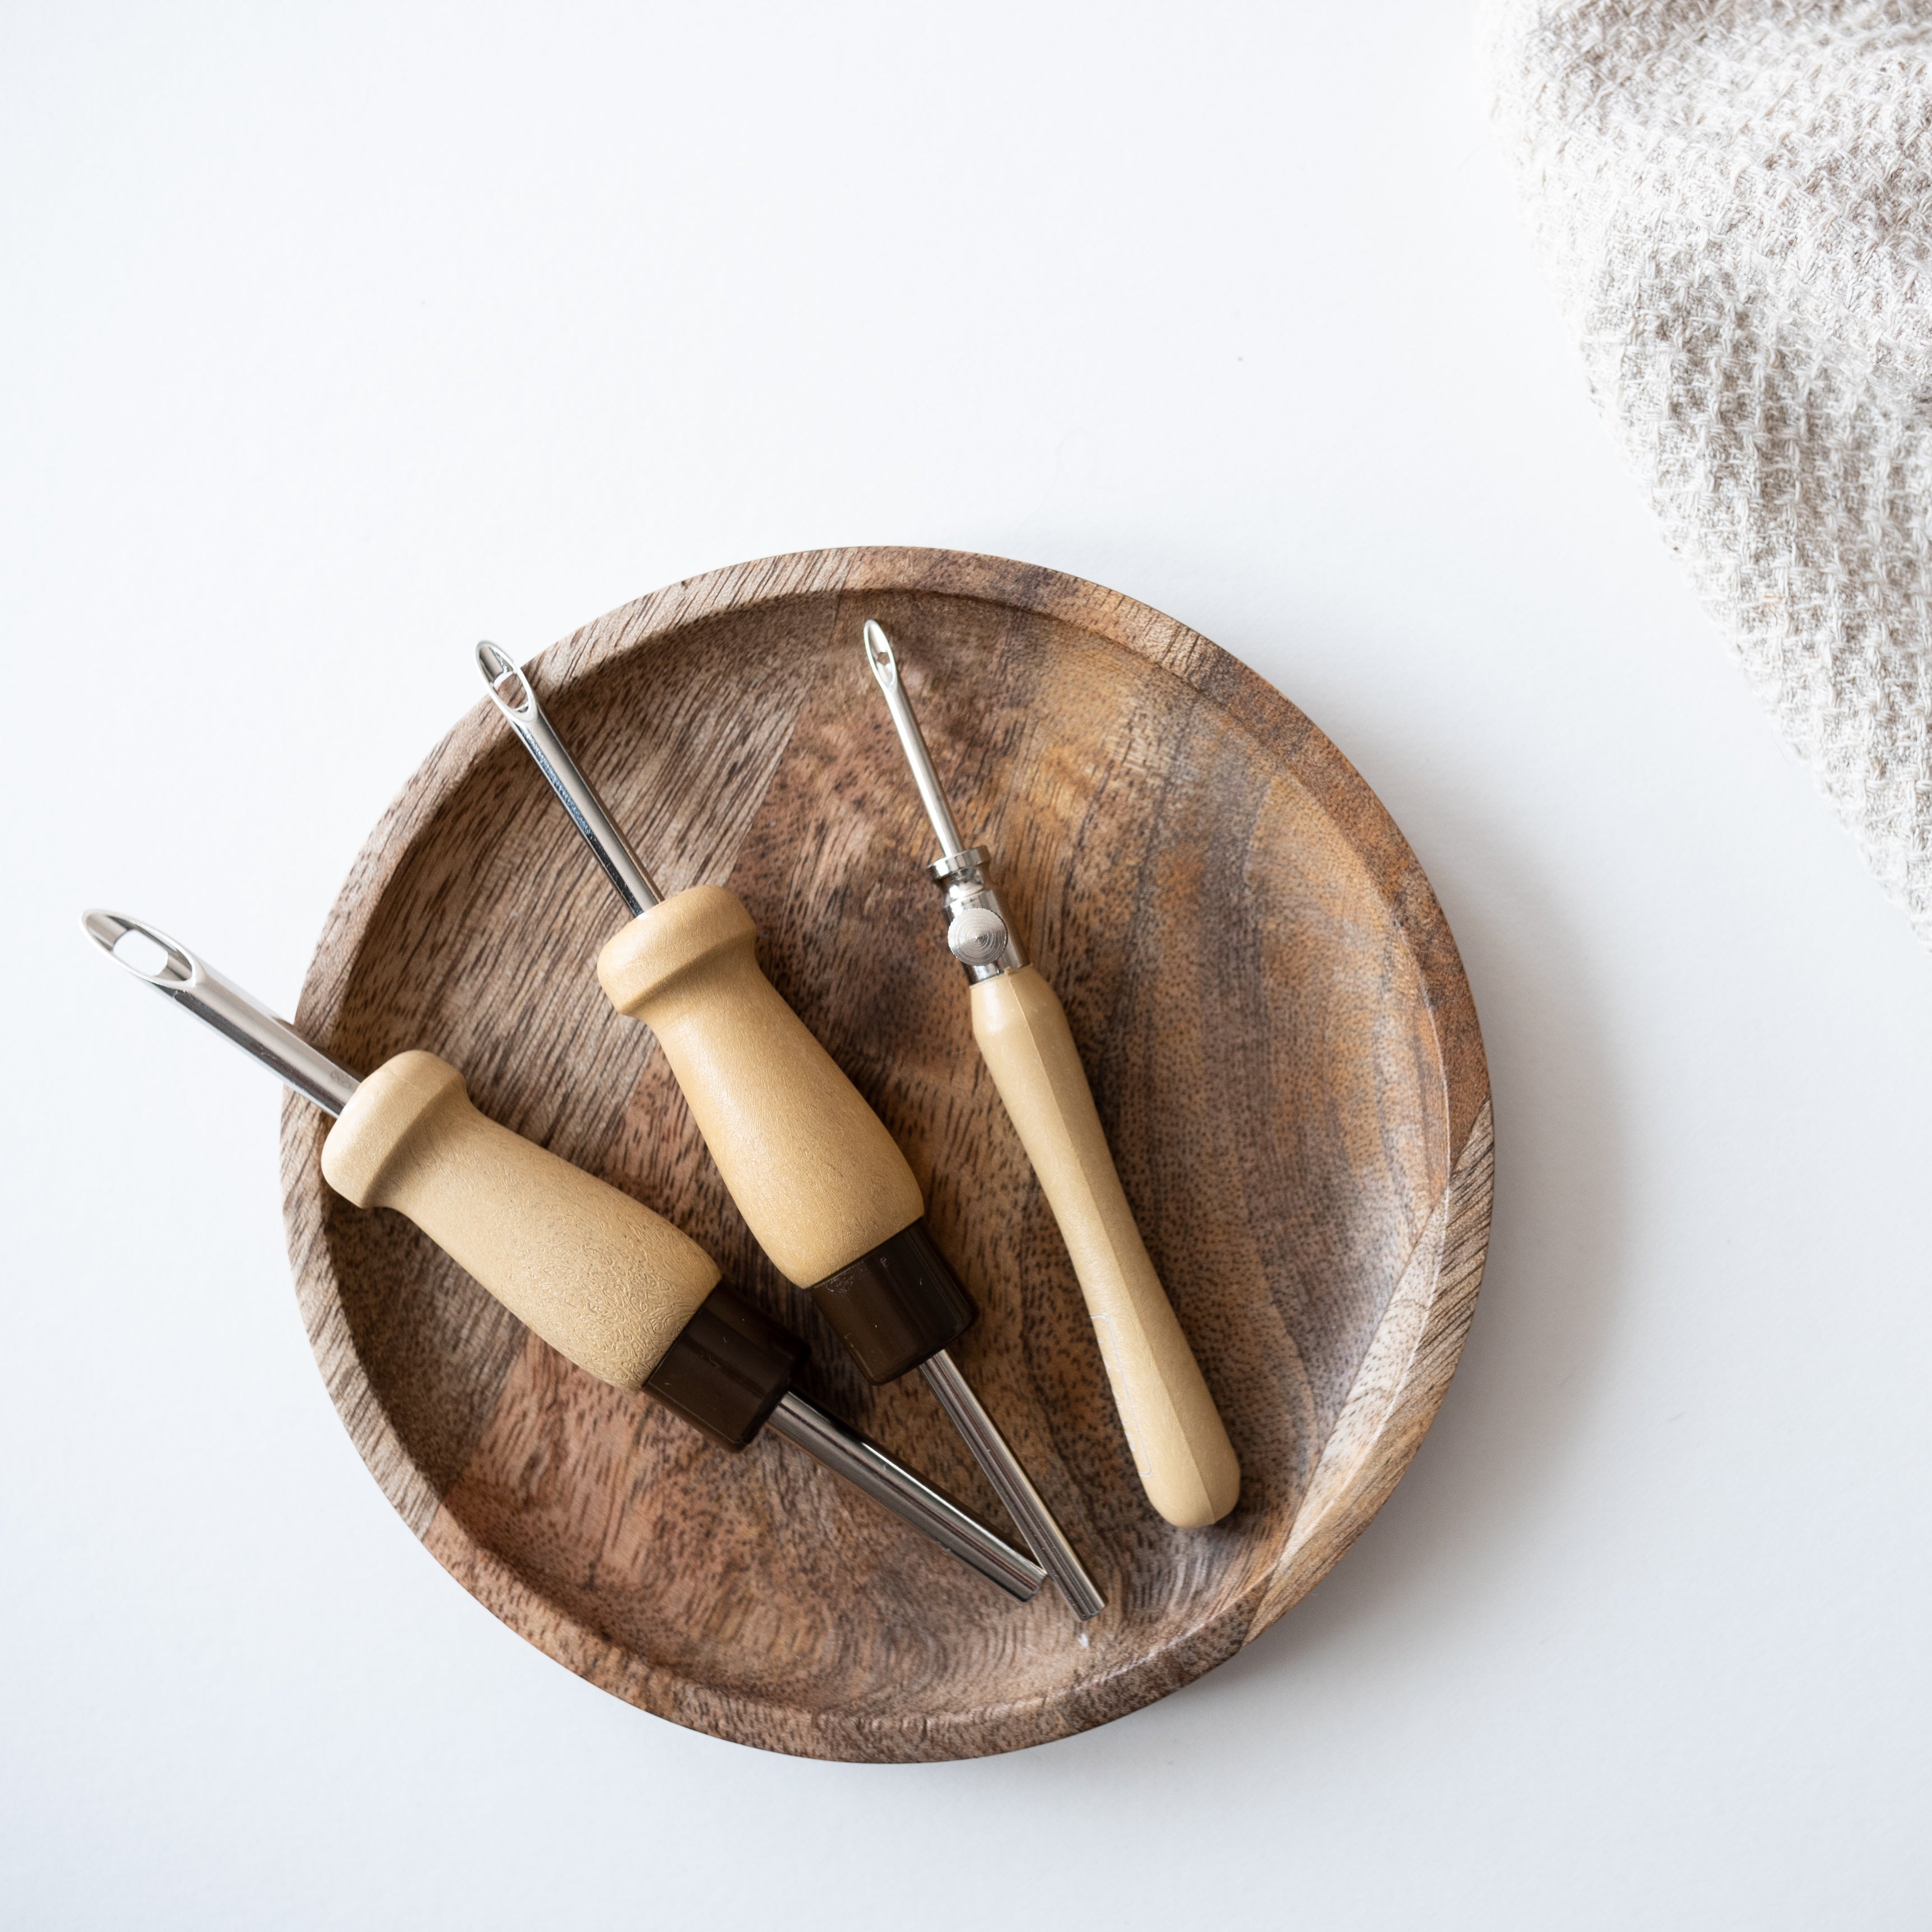 Three Lavor punch needle tools on a small wooden dish, fabric just coming into shot in the corner